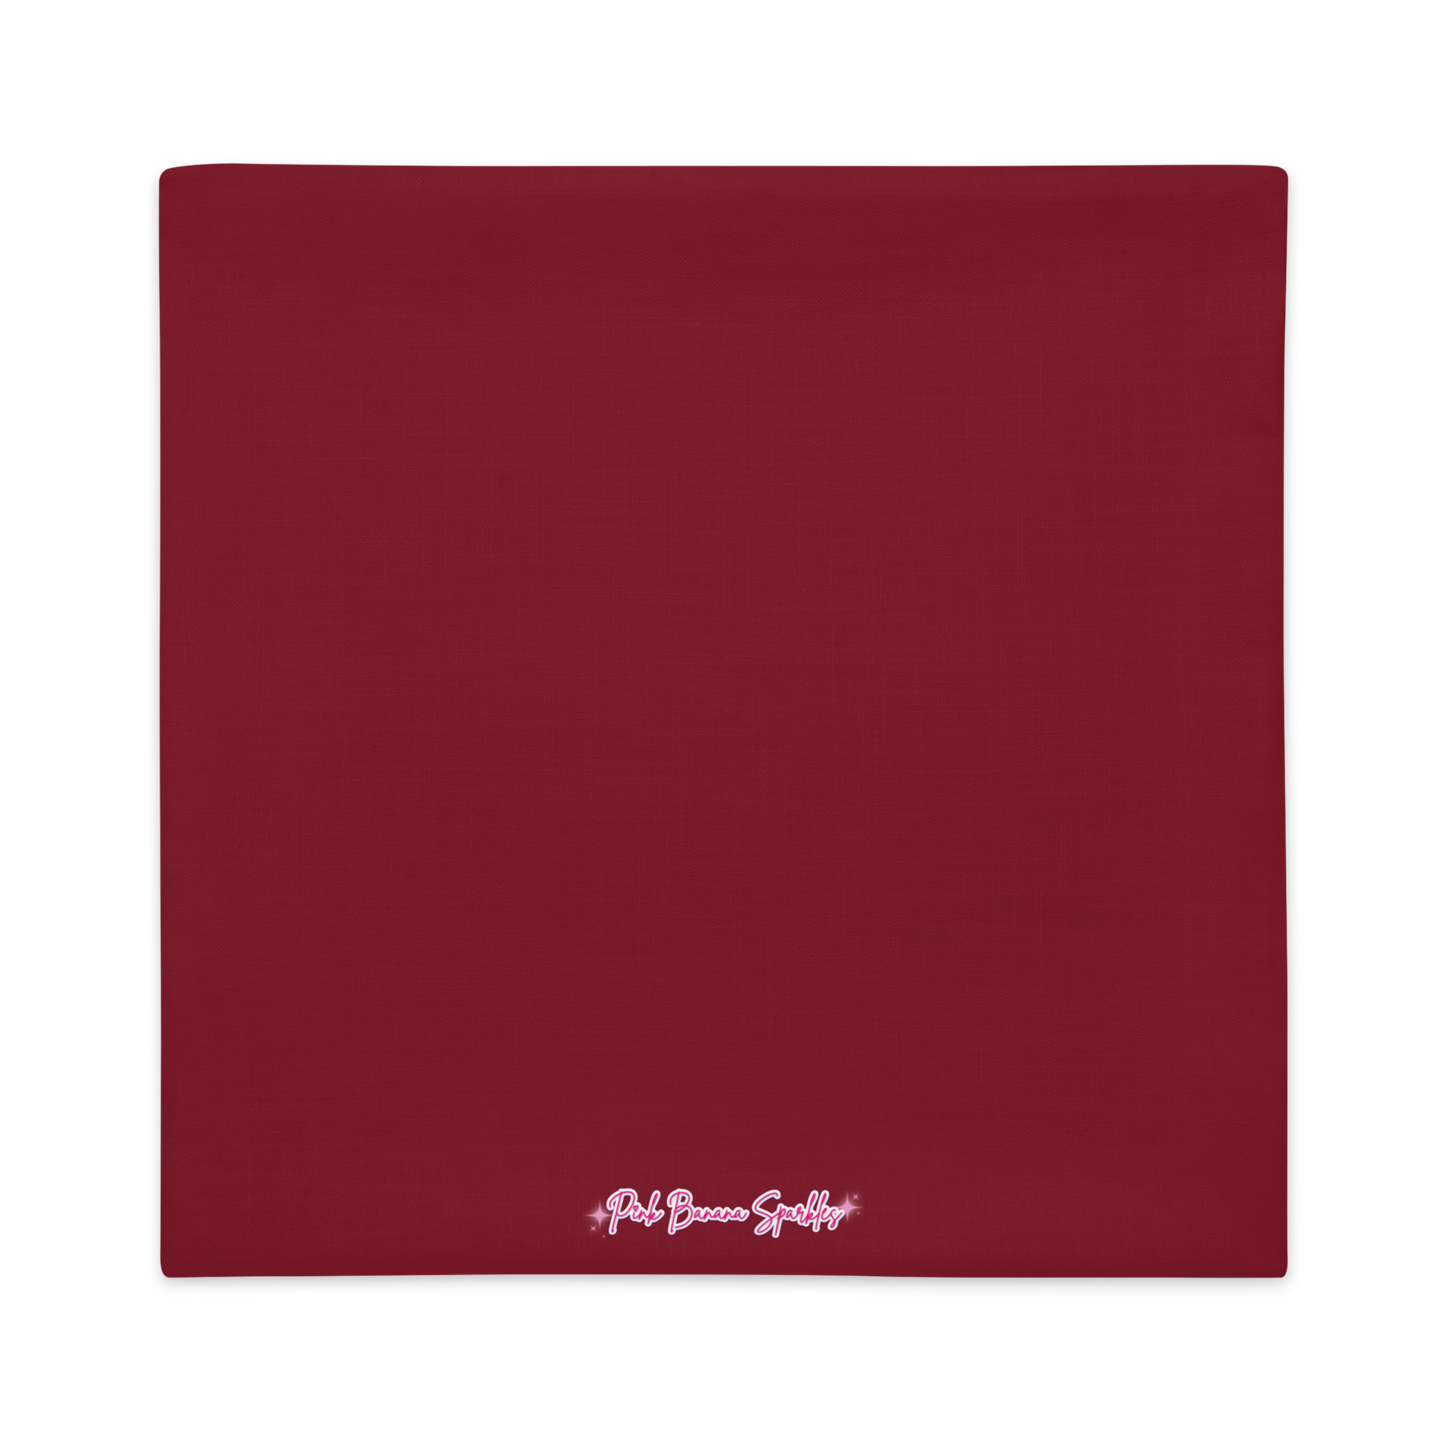 Pumpkin Spice and Everything Nice (burgundy) - Premium Pillow and Pillowcase